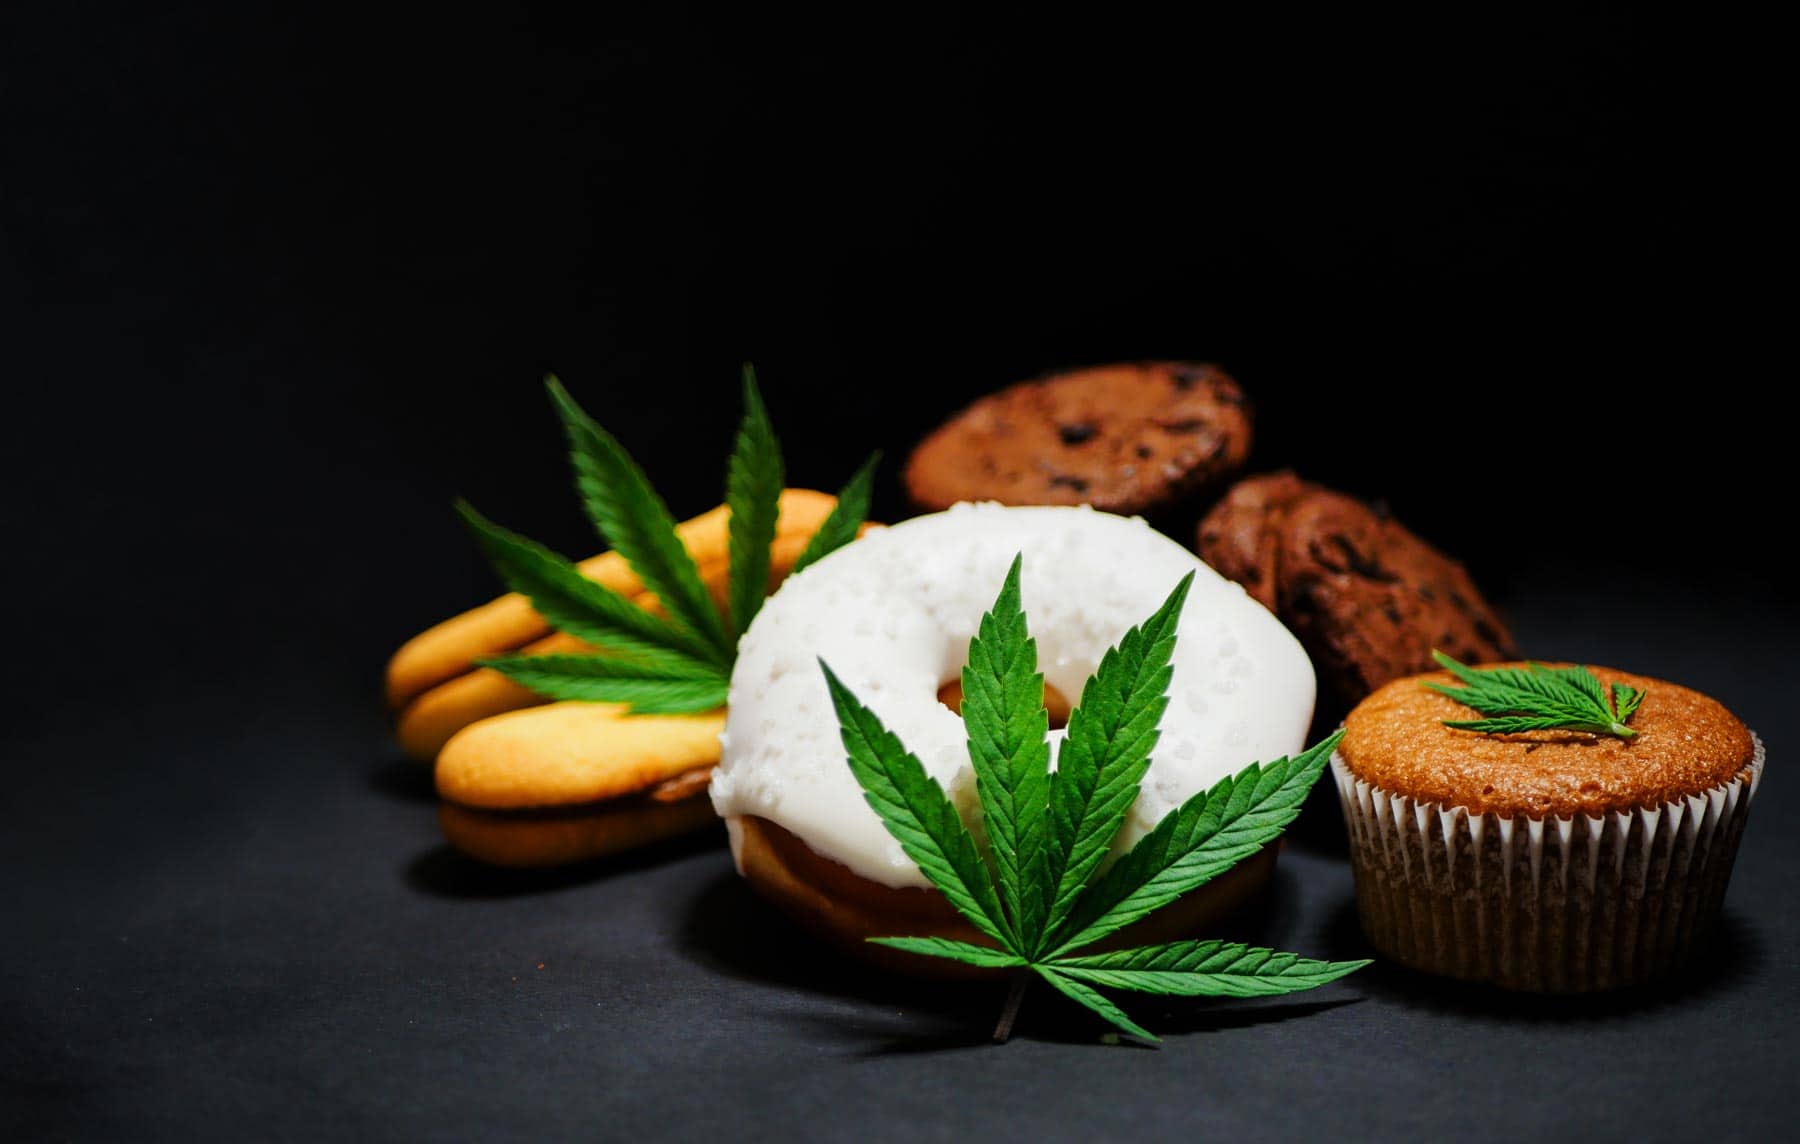 Are Delta 8 Edibles Effects Safe? Experts Weigh In.